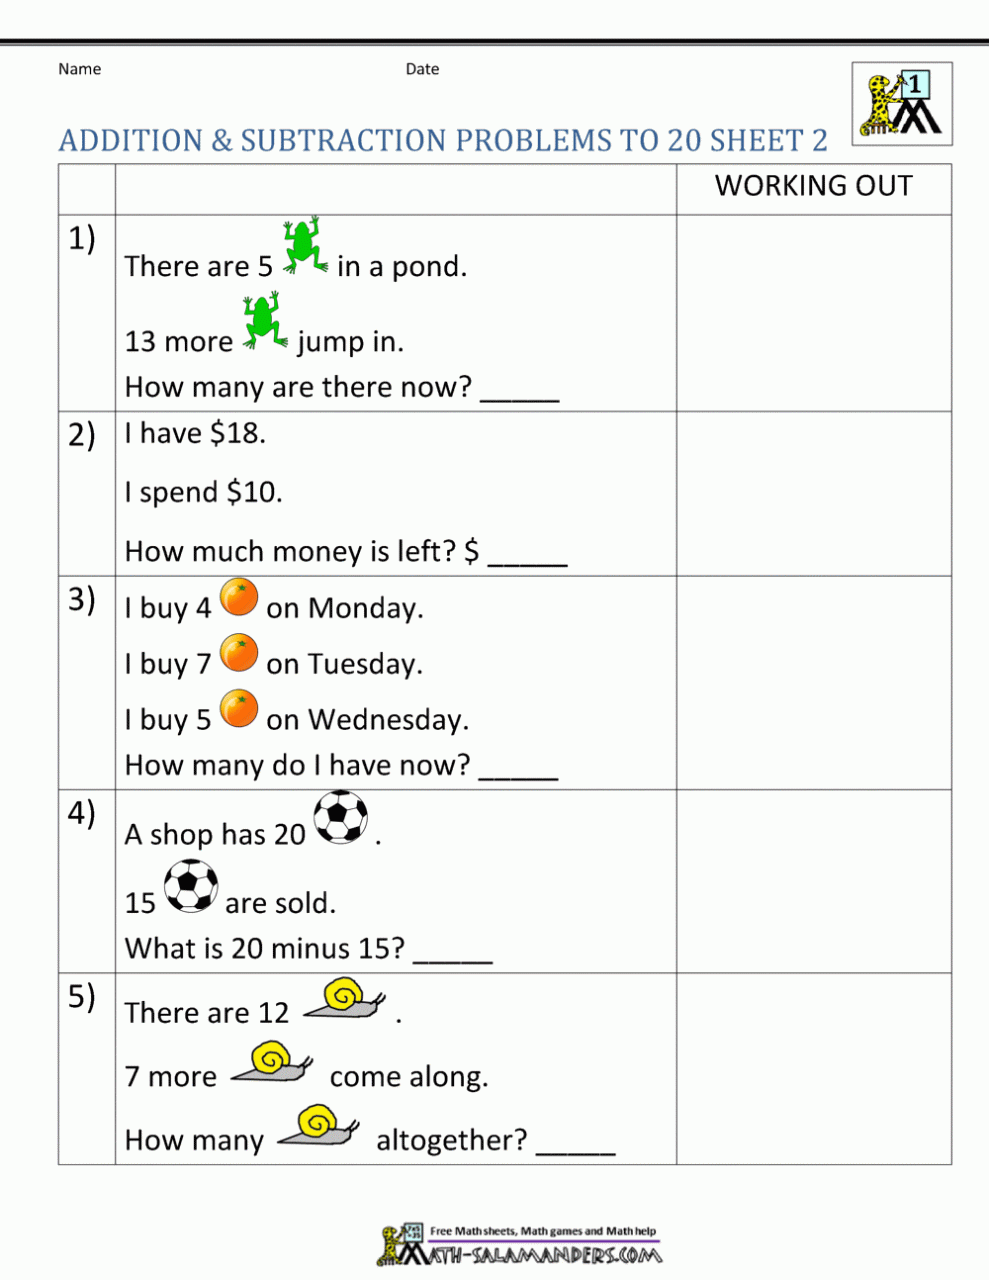 primary 1 addition and subtraction worksheets Google Search in 2020